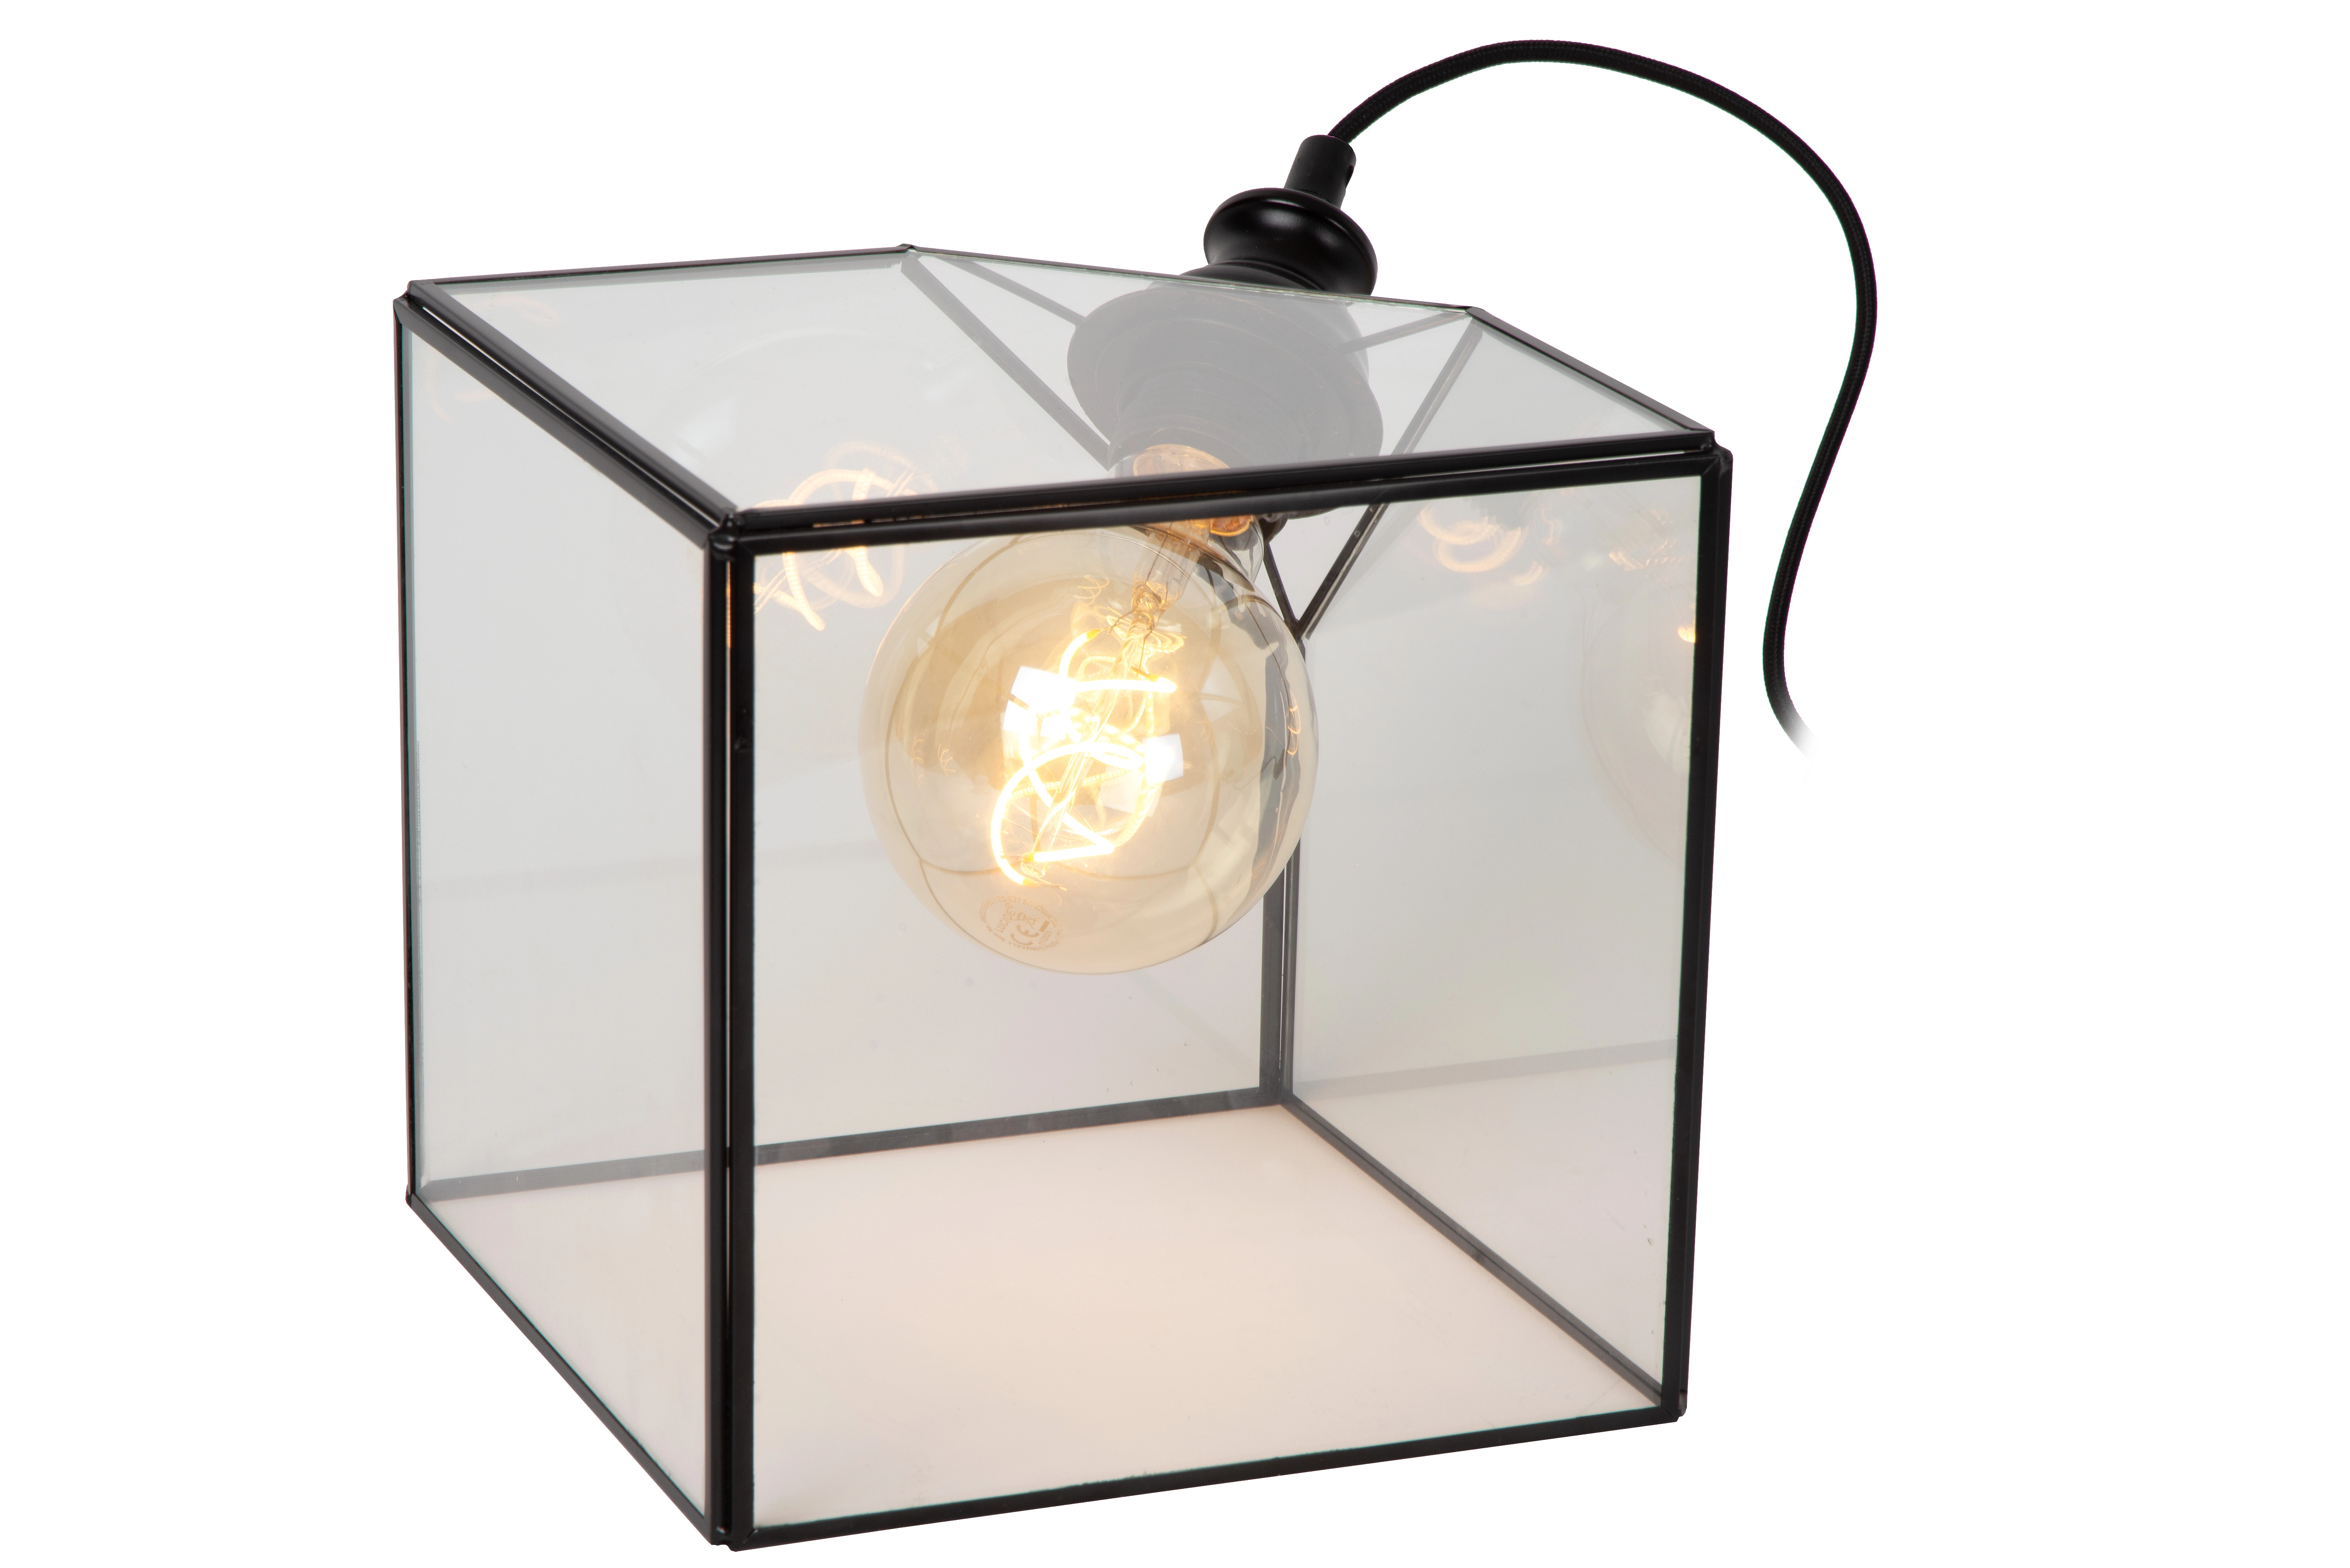 LU 10518/20/60 Lucide DAVOS - Table lamp - 1xE27 - Transparant